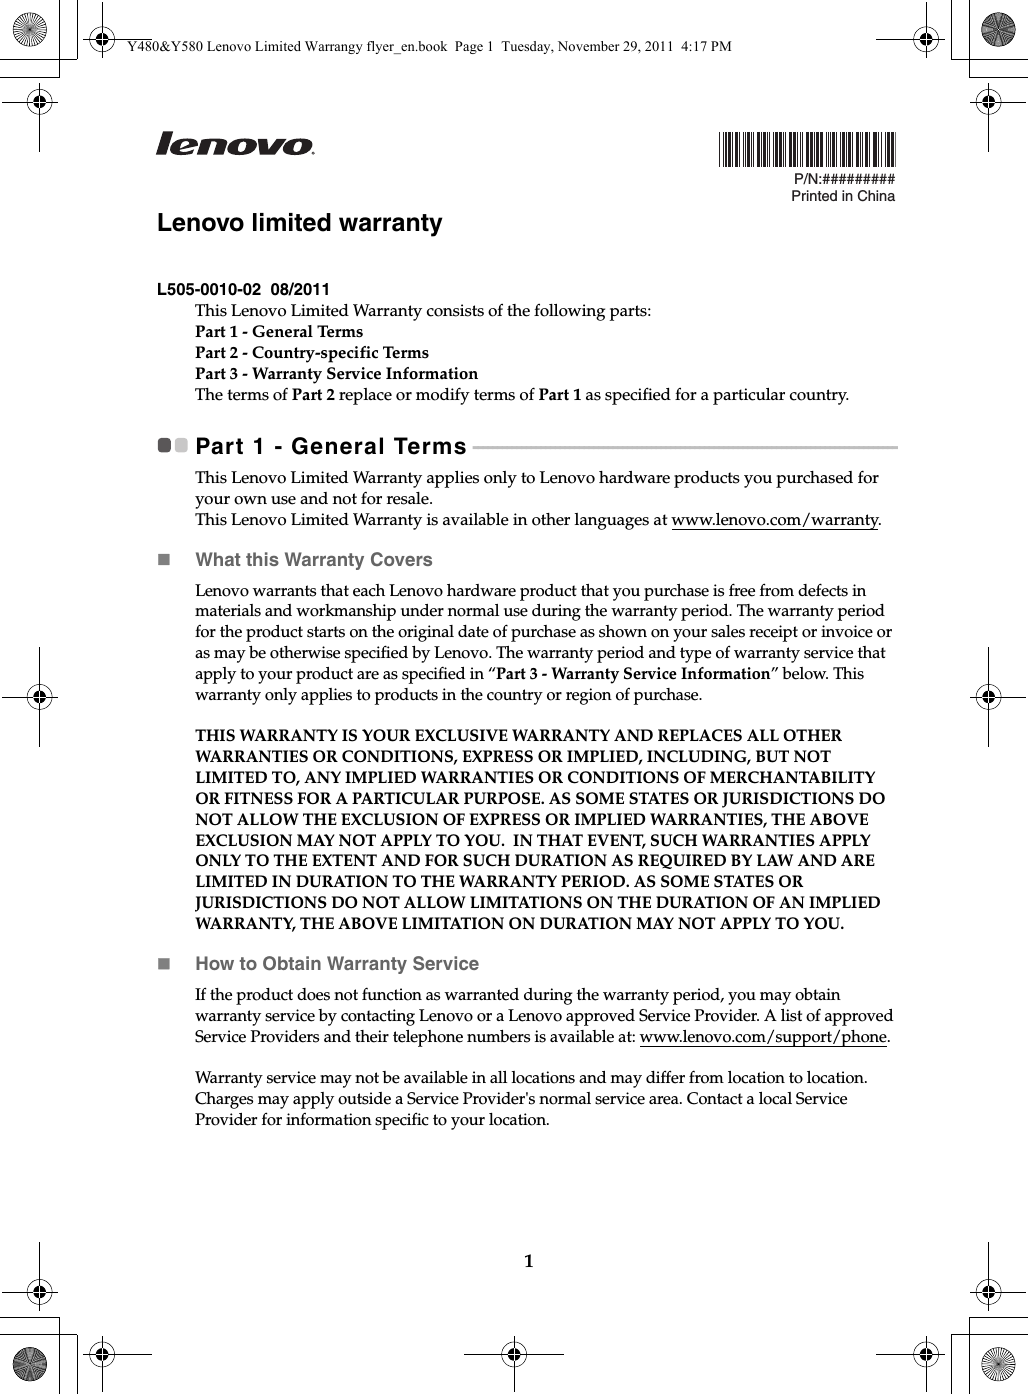 1P/N:#########Printed in ChinaLenovo limited warrantyL505-0010-02  08/2011This Lenovo Limited Warranty consists of the following parts:Part 1 - General TermsPart 2 - Country-specific Terms Part 3 - Warranty Service Information The terms of Part 2 replace or modify terms of Part 1 as specified for a particular country.Part 1 - General Terms - - - - - - - - - - - - - - - - - - - - - - - - - - - - - - - - - - - - - - - - - - - - - - - - - - - - - - - - - - - - - - - - - - - - - - - - - - - - - - - - - - - - - - - -This Lenovo Limited Warranty applies only to Lenovo hardware products you purchased for your own use and not for resale.This Lenovo Limited Warranty is available in other languages at www.lenovo.com/warranty.What this Warranty CoversLenovo warrants that each Lenovo hardware product that you purchase is free from defects in materials and workmanship under normal use during the warranty period. The warranty period for the product starts on the original date of purchase as shown on your sales receipt or invoice or as may be otherwise specified by Lenovo. The warranty period and type of warranty service that apply to your product are as specified in “Part 3 - Warranty Service Information” below. This warranty only applies to products in the country or region of purchase.THIS WARRANTY IS YOUR EXCLUSIVE WARRANTY AND REPLACES ALL OTHER WARRANTIES OR CONDITIONS, EXPRESS OR IMPLIED, INCLUDING, BUT NOT LIMITED TO, ANY IMPLIED WARRANTIES OR CONDITIONS OF MERCHANTABILITY OR FITNESS FOR A PARTICULAR PURPOSE. AS SOME STATES OR JURISDICTIONS DO NOT ALLOW THE EXCLUSION OF EXPRESS OR IMPLIED WARRANTIES, THE ABOVE EXCLUSION MAY NOT APPLY TO YOU.  IN THAT EVENT, SUCH WARRANTIES APPLY ONLY TO THE EXTENT AND FOR SUCH DURATION AS REQUIRED BY LAW AND ARE LIMITED IN DURATION TO THE WARRANTY PERIOD. AS SOME STATES OR JURISDICTIONS DO NOT ALLOW LIMITATIONS ON THE DURATION OF AN IMPLIED WARRANTY, THE ABOVE LIMITATION ON DURATION MAY NOT APPLY TO YOU.How to Obtain Warranty ServiceIf the product does not function as warranted during the warranty period, you may obtain warranty service by contacting Lenovo or a Lenovo approved Service Provider. A list of approved Service Providers and their telephone numbers is available at: www.lenovo.com/support/phone.Warranty service may not be available in all locations and may differ from location to location. Charges may apply outside a Service Provider&apos;s normal service area. Contact a local Service Provider for information specific to your location.Y480&amp;Y580 Lenovo Limited Warrangy flyer_en.book  Page 1  Tuesday, November 29, 2011  4:17 PM